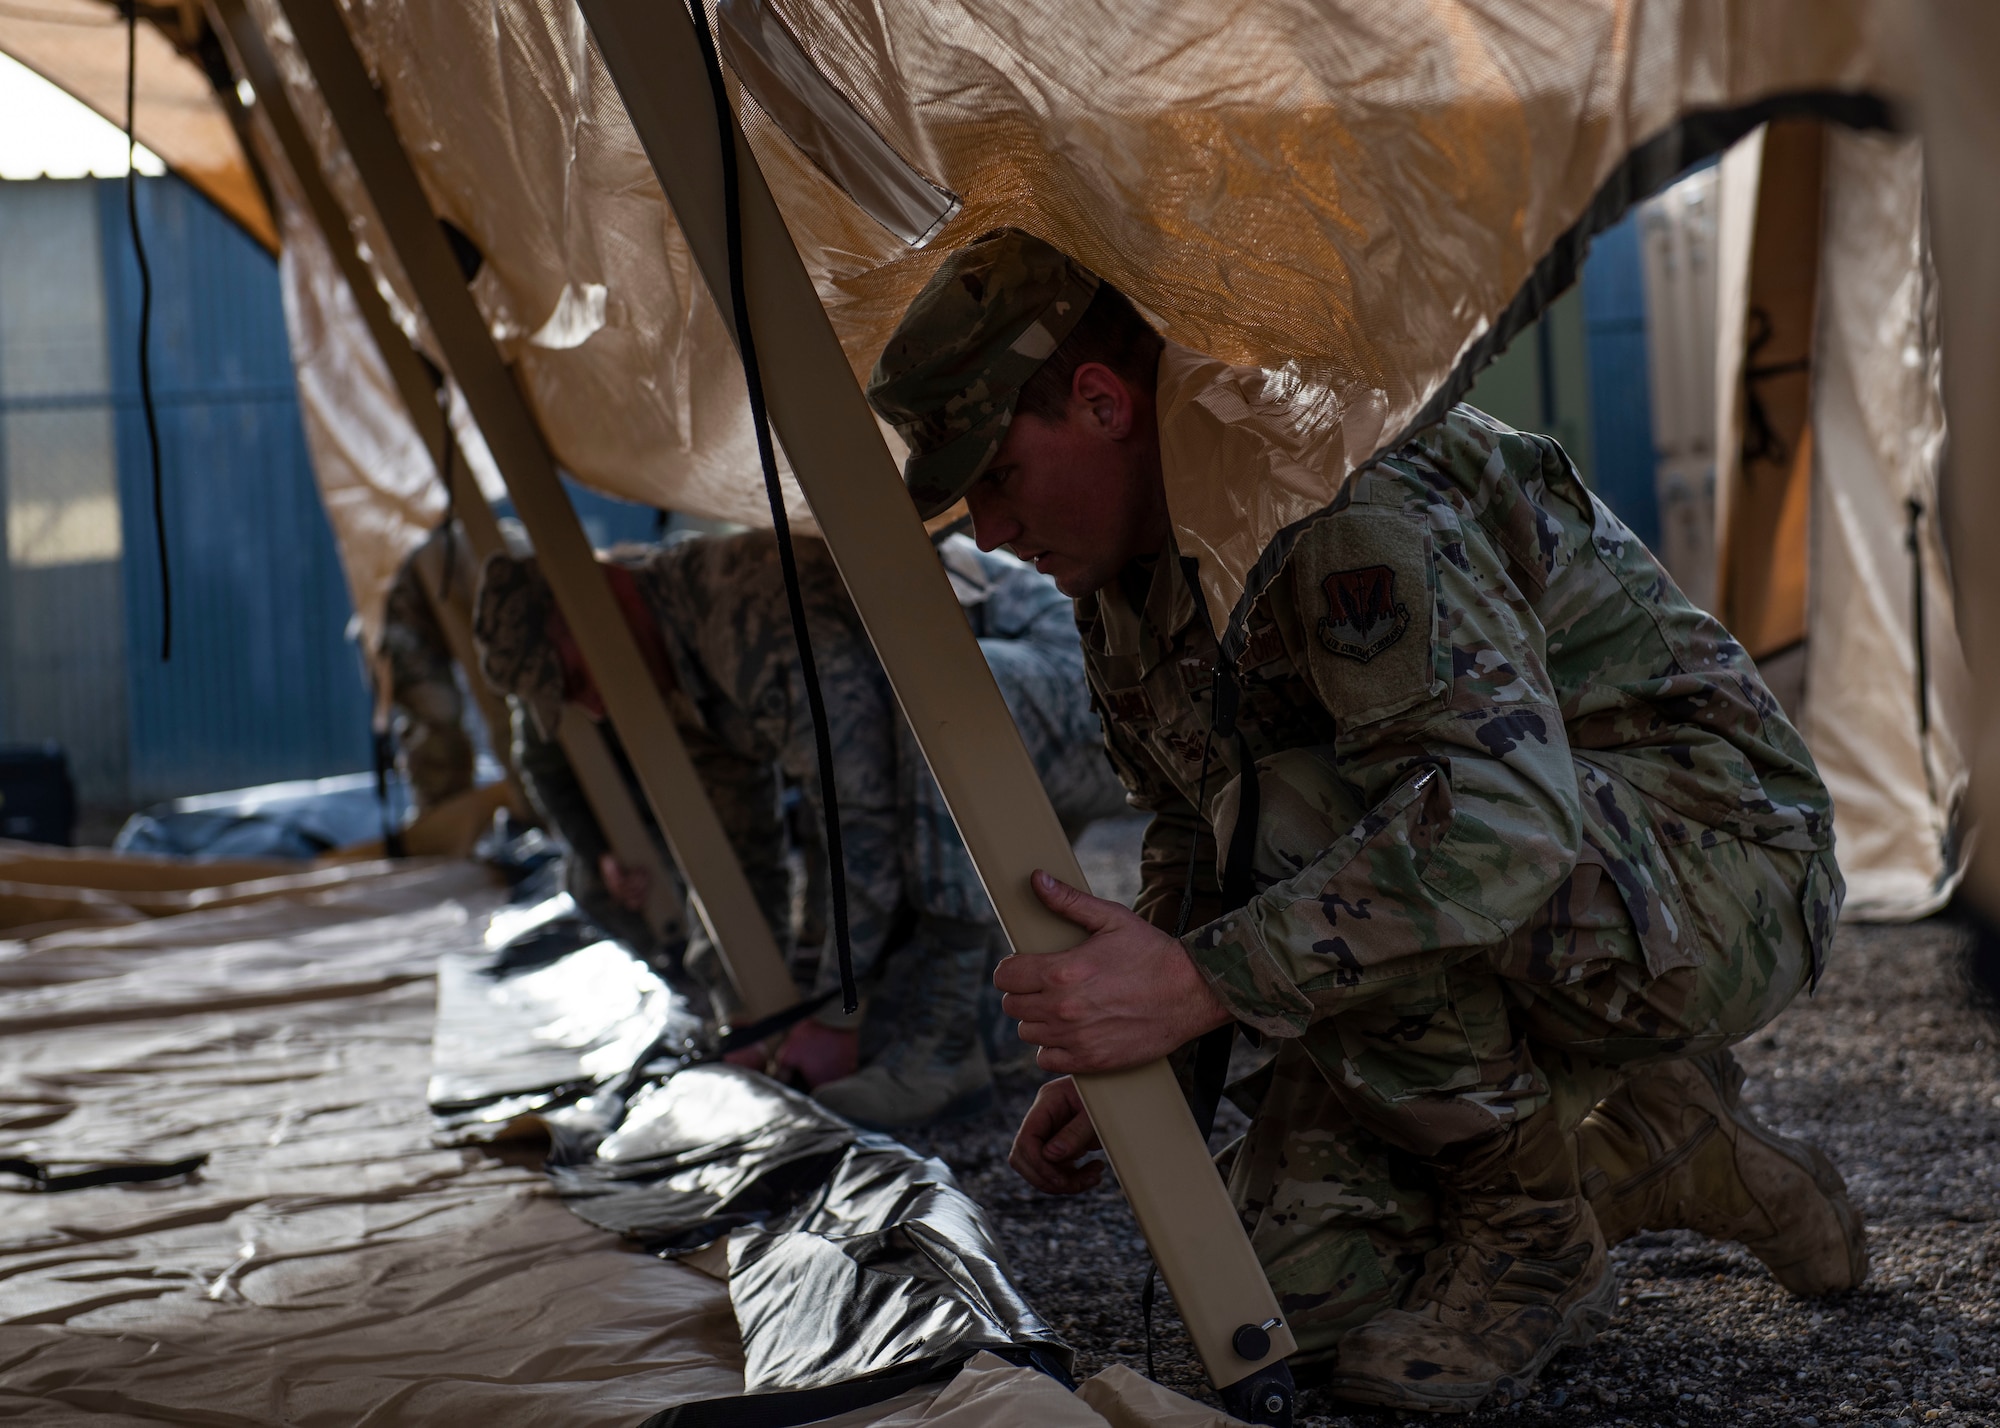 Airmen from the 366th Civil Engineer Squadron set up a Rapid Deployment Tactical Military Shelter during their multi-capable Airman training, Jan. 23, 2020, at Mountain Home Air Force Base, Idaho. The shelter is made of durable material and can withstand winds up to 60 mph. (U.S. Air Force photo by Senior Airman Tyrell Hall)